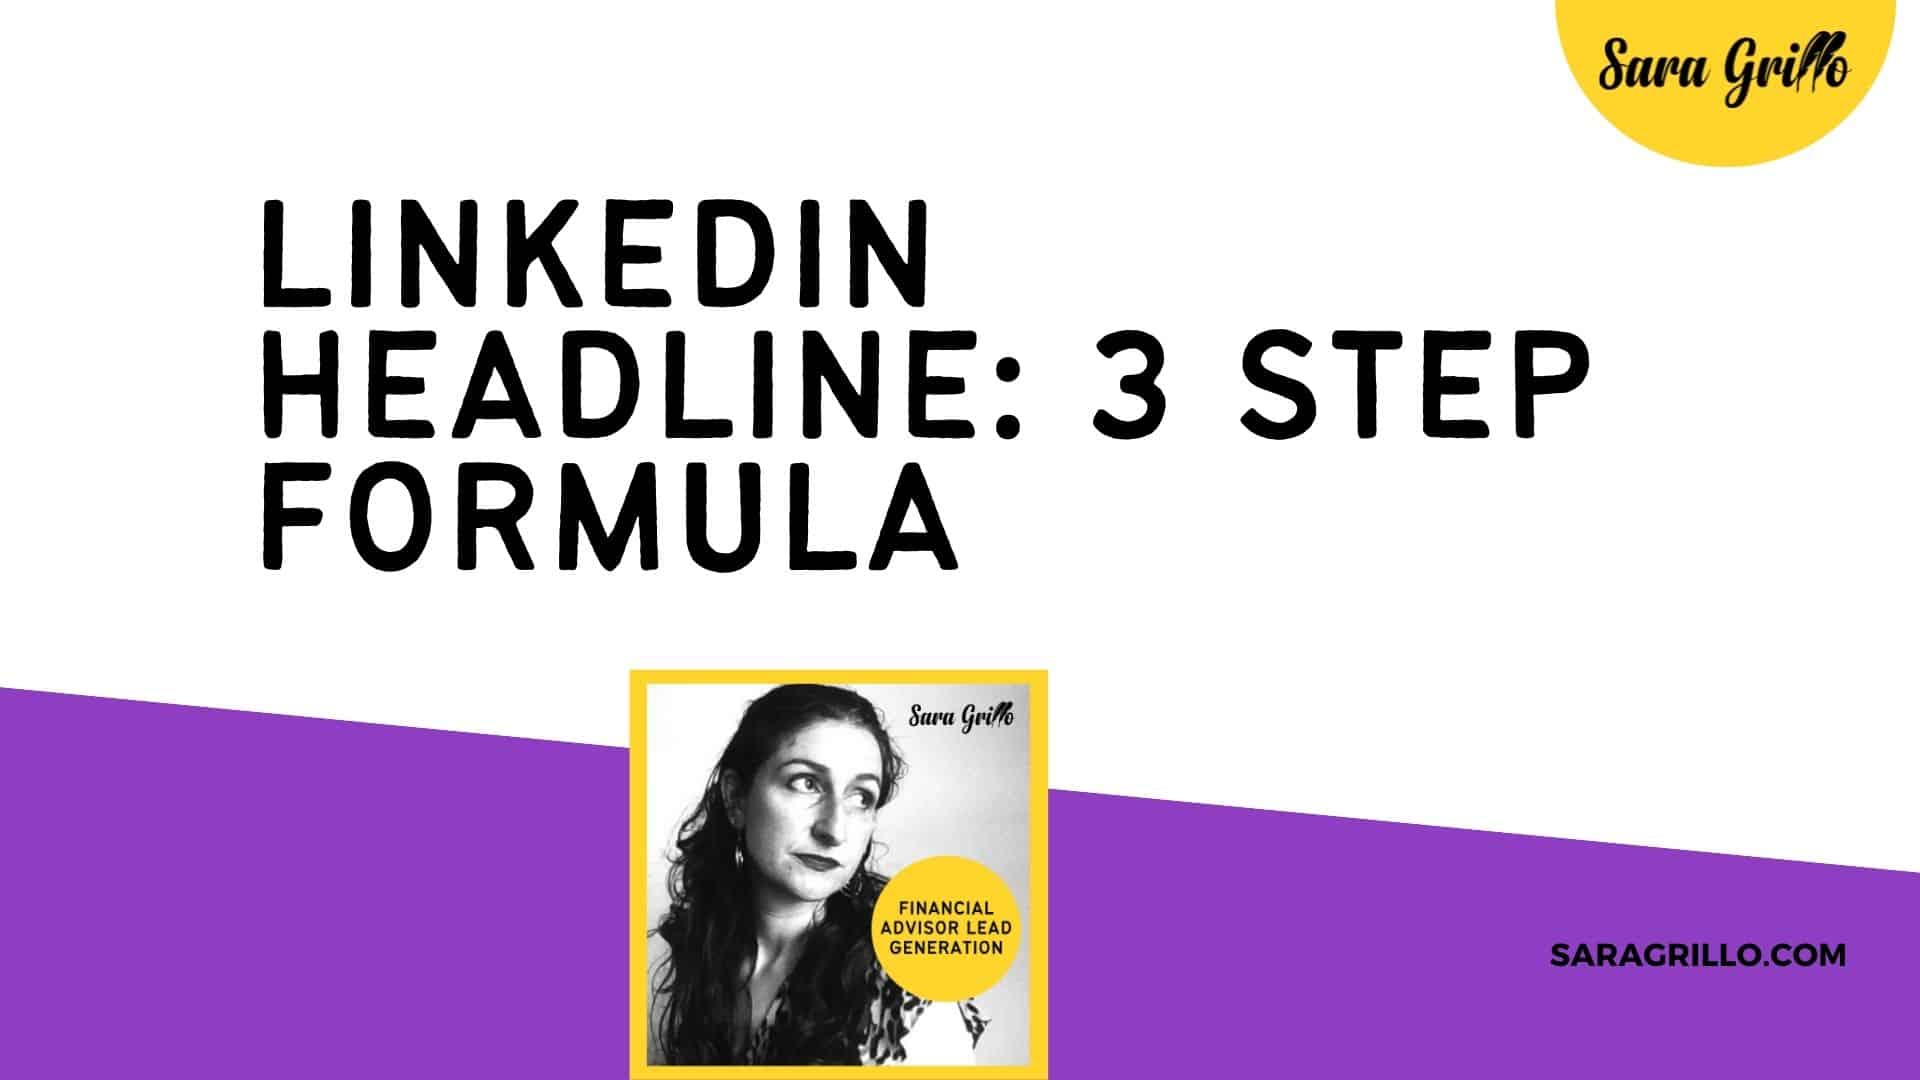 In this blog we discuss a formula for getting a great LinkedIn headline, as well as some examples.